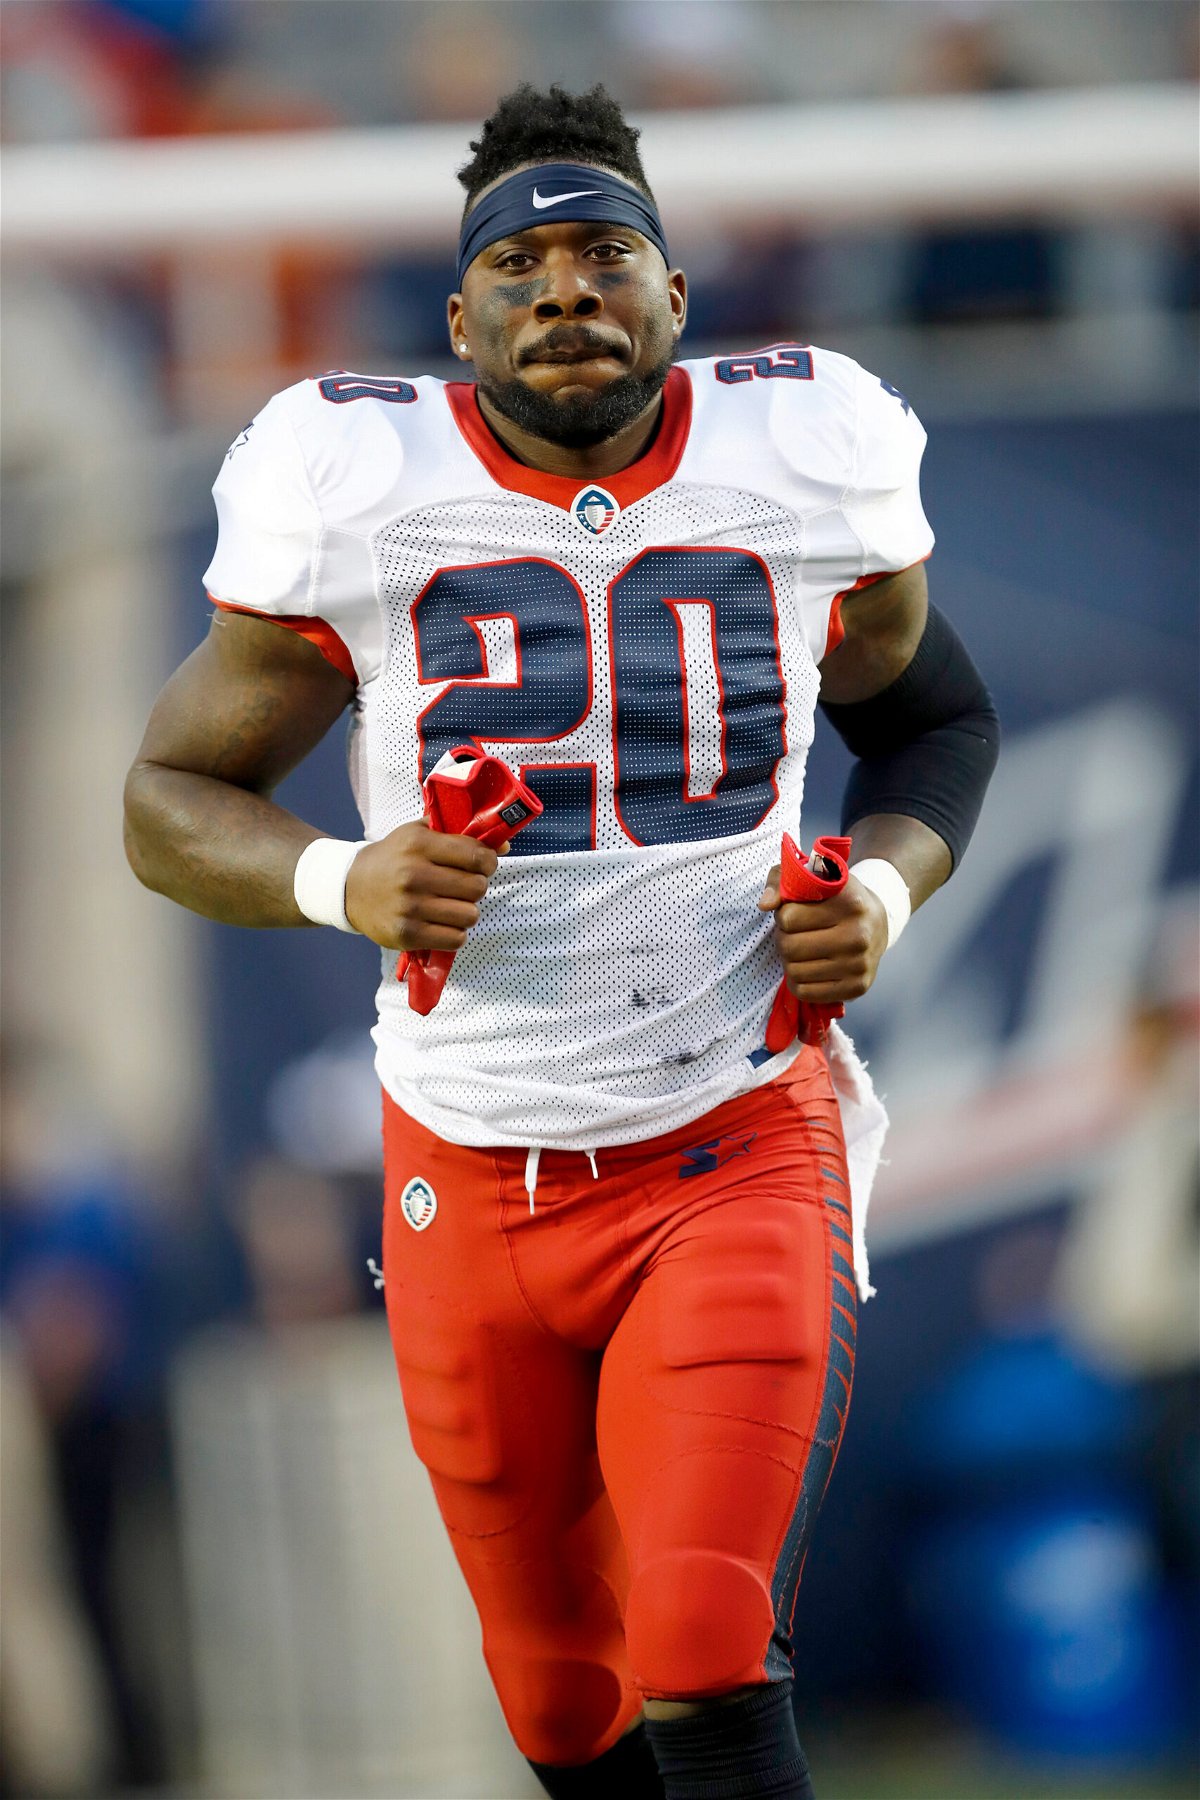 <i>Wesley Hitt/AAF/Getty Images North America/Getty Images</i><br/>Former NFL player Zac Stacy is in police custody after disturbing video surfaced appearing to show Stacy assaulting his ex-girlfriend. Stacy is pictured in March 2019